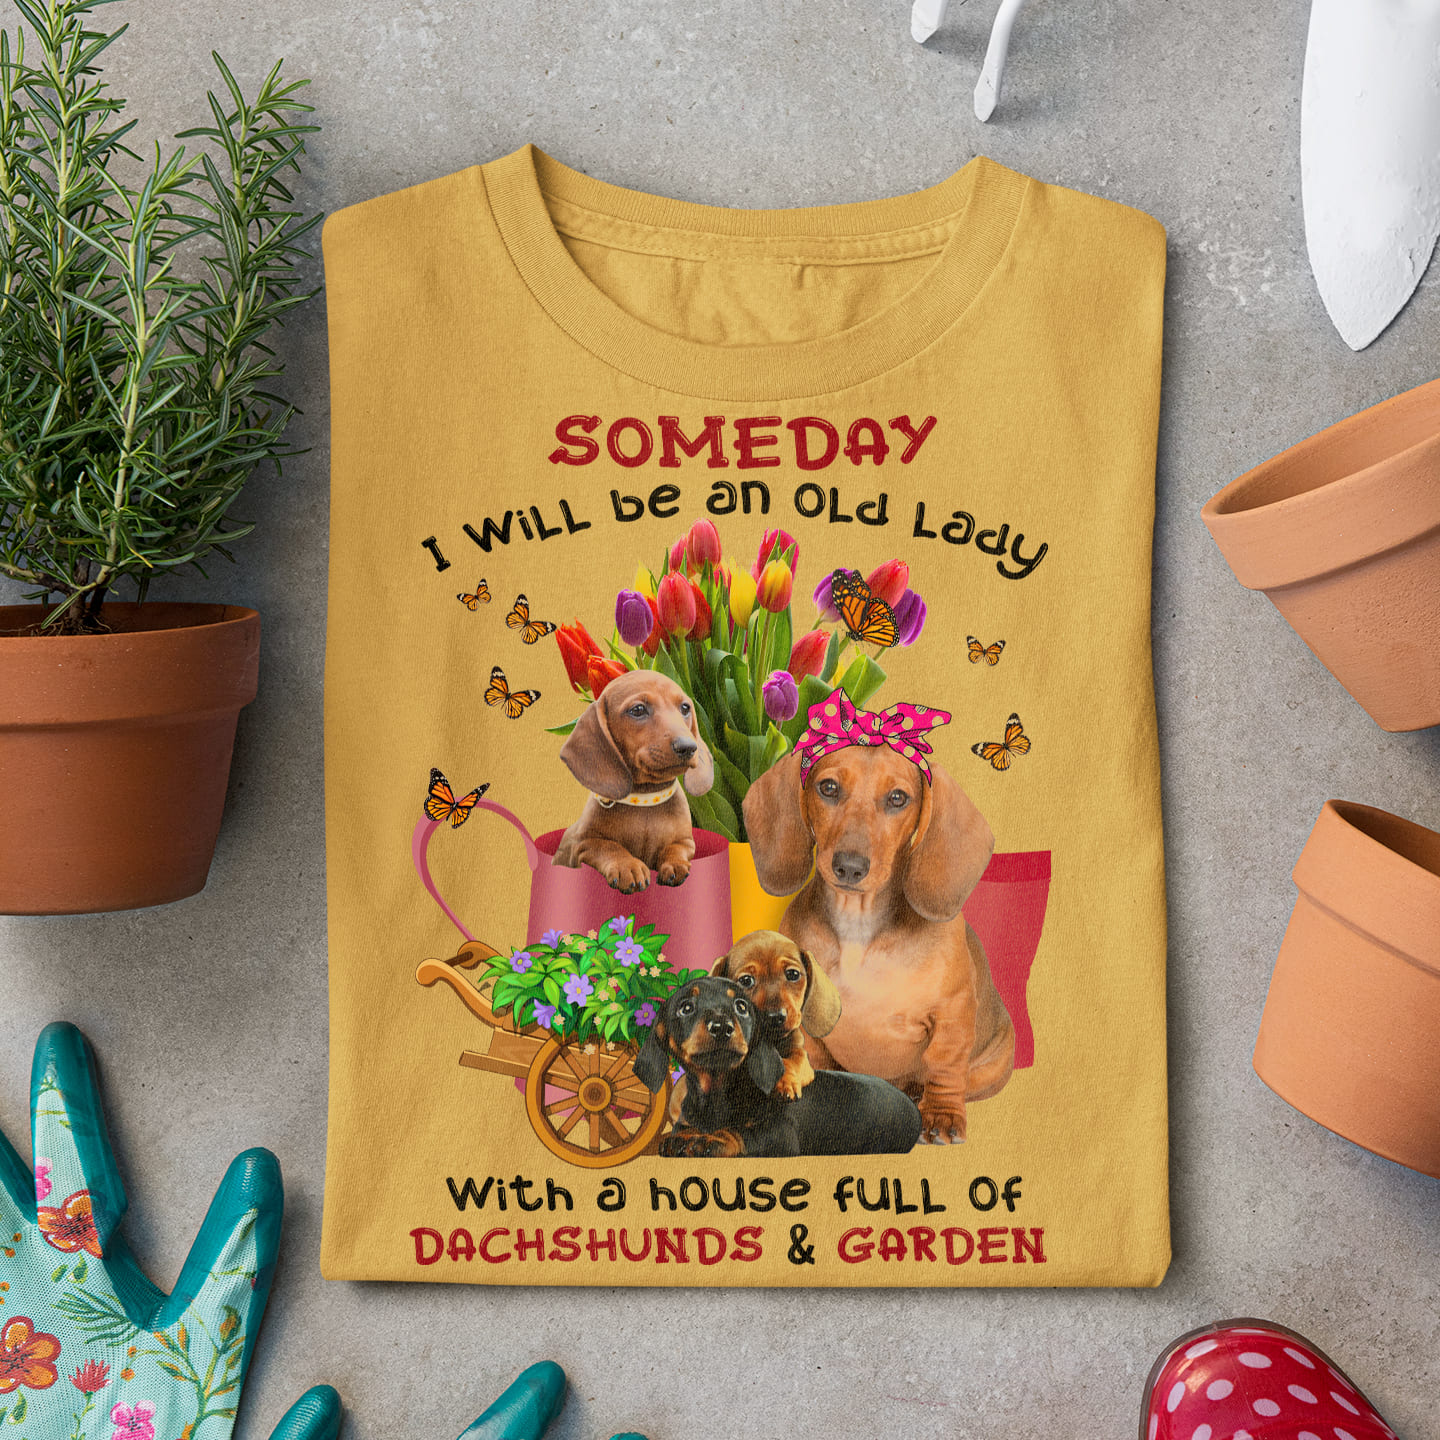 Someday I will be an old lady with a house full of Dachshunds and garden